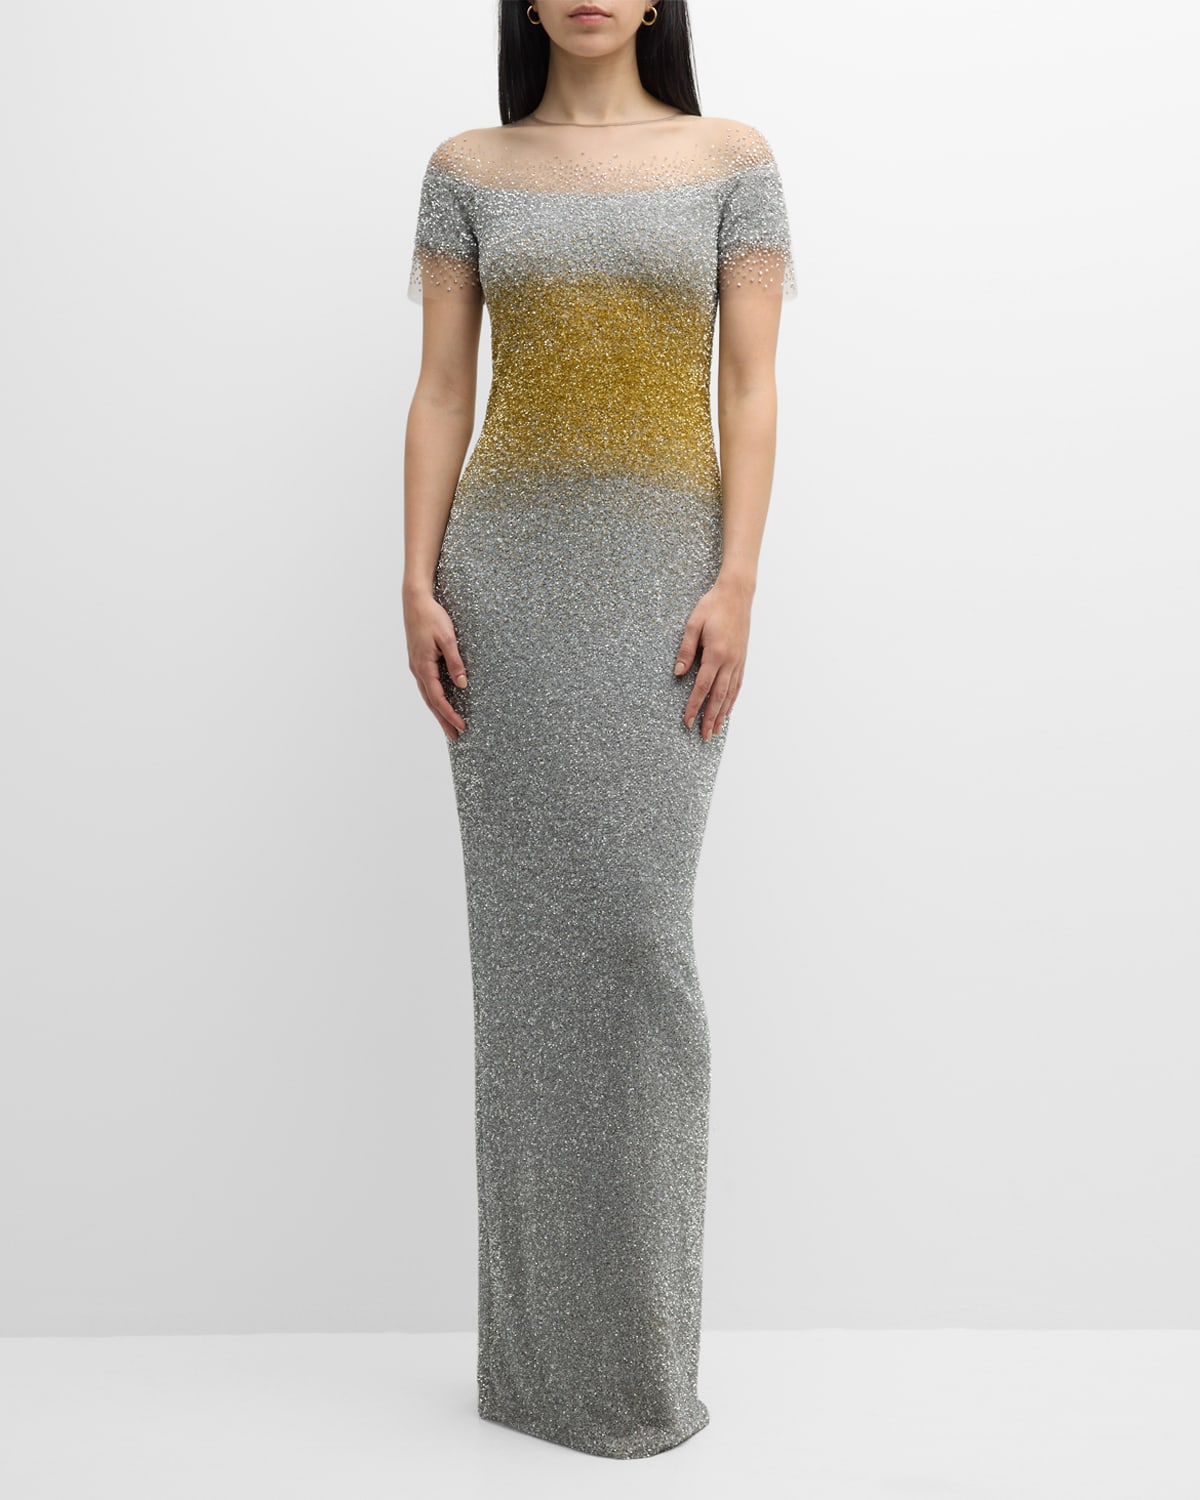 Pamella Roland Bicolor Degrade Sequin Embellished Illusion Gown In Silver Gold